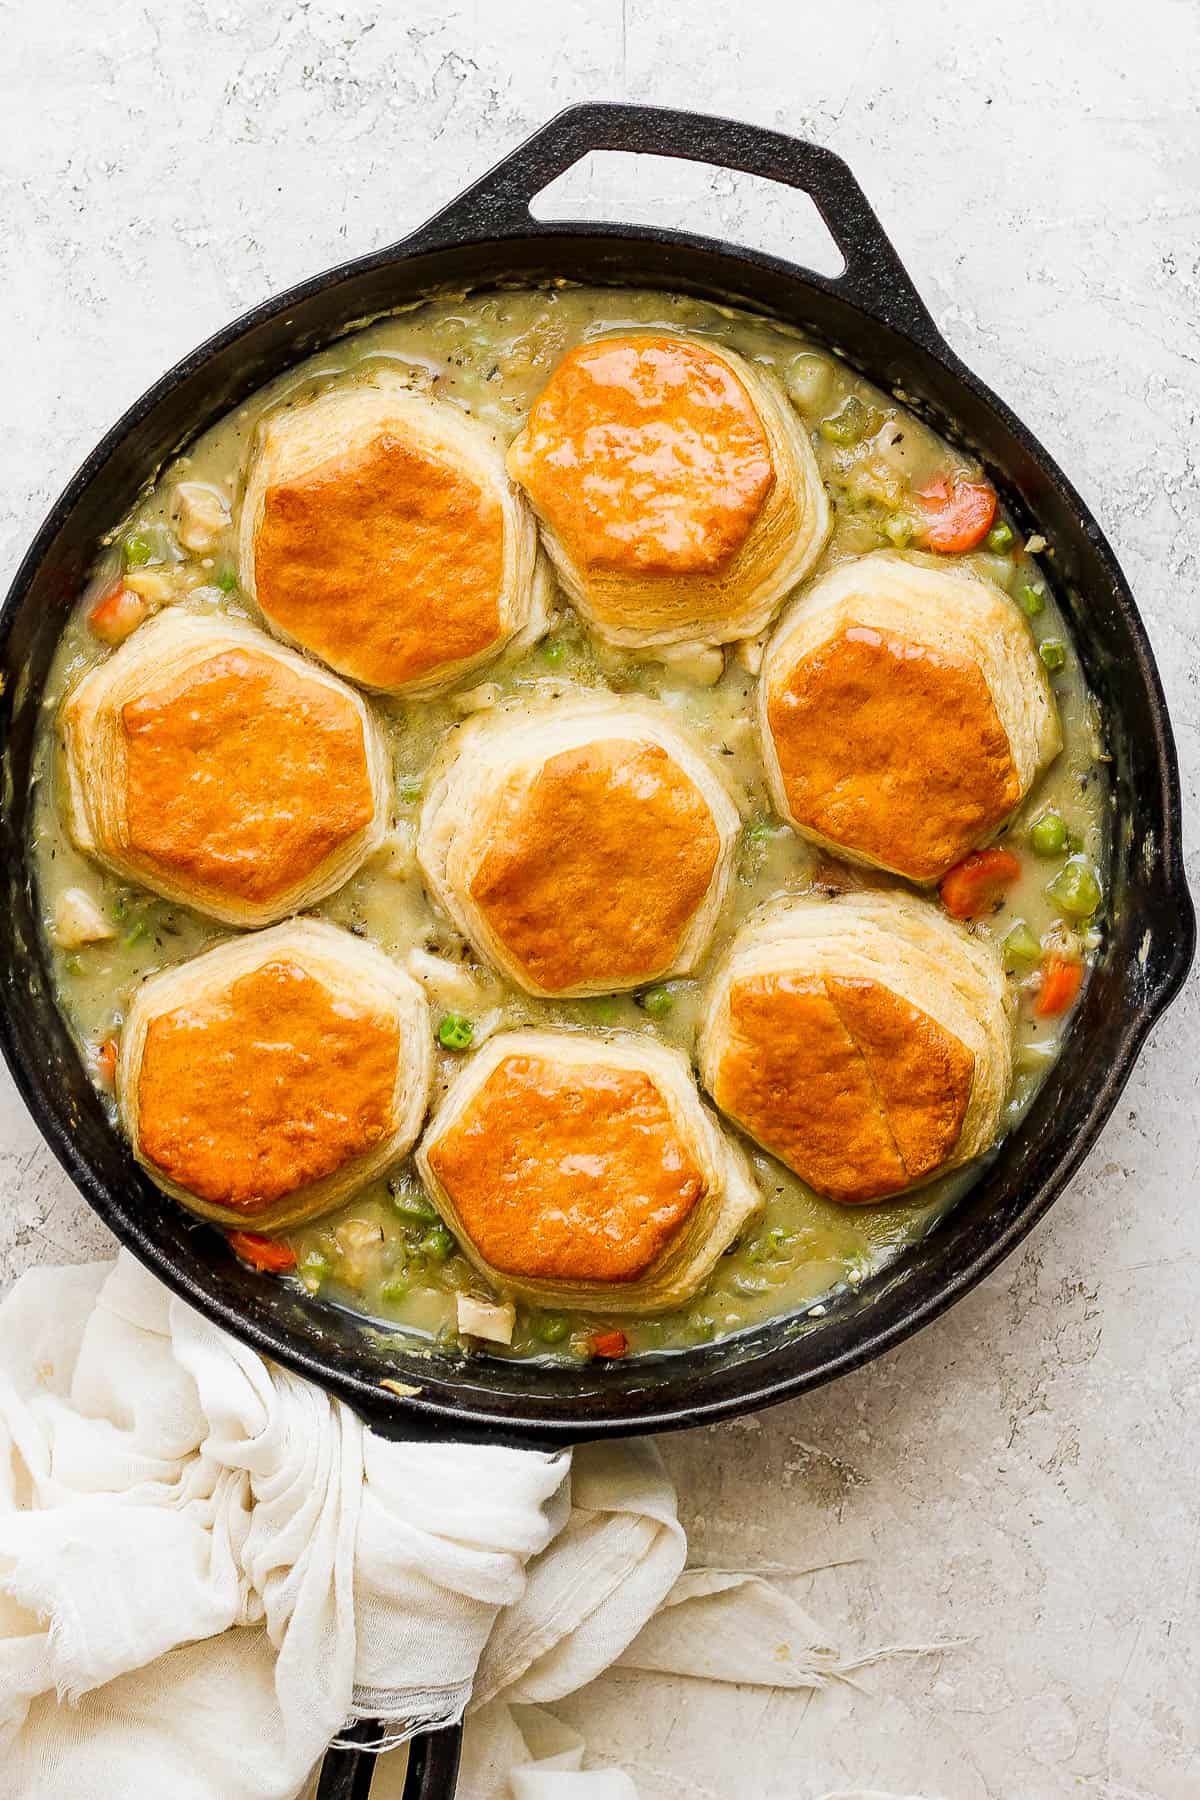 The entire chicken pot pie with biscuits skillet after baking in the oven.